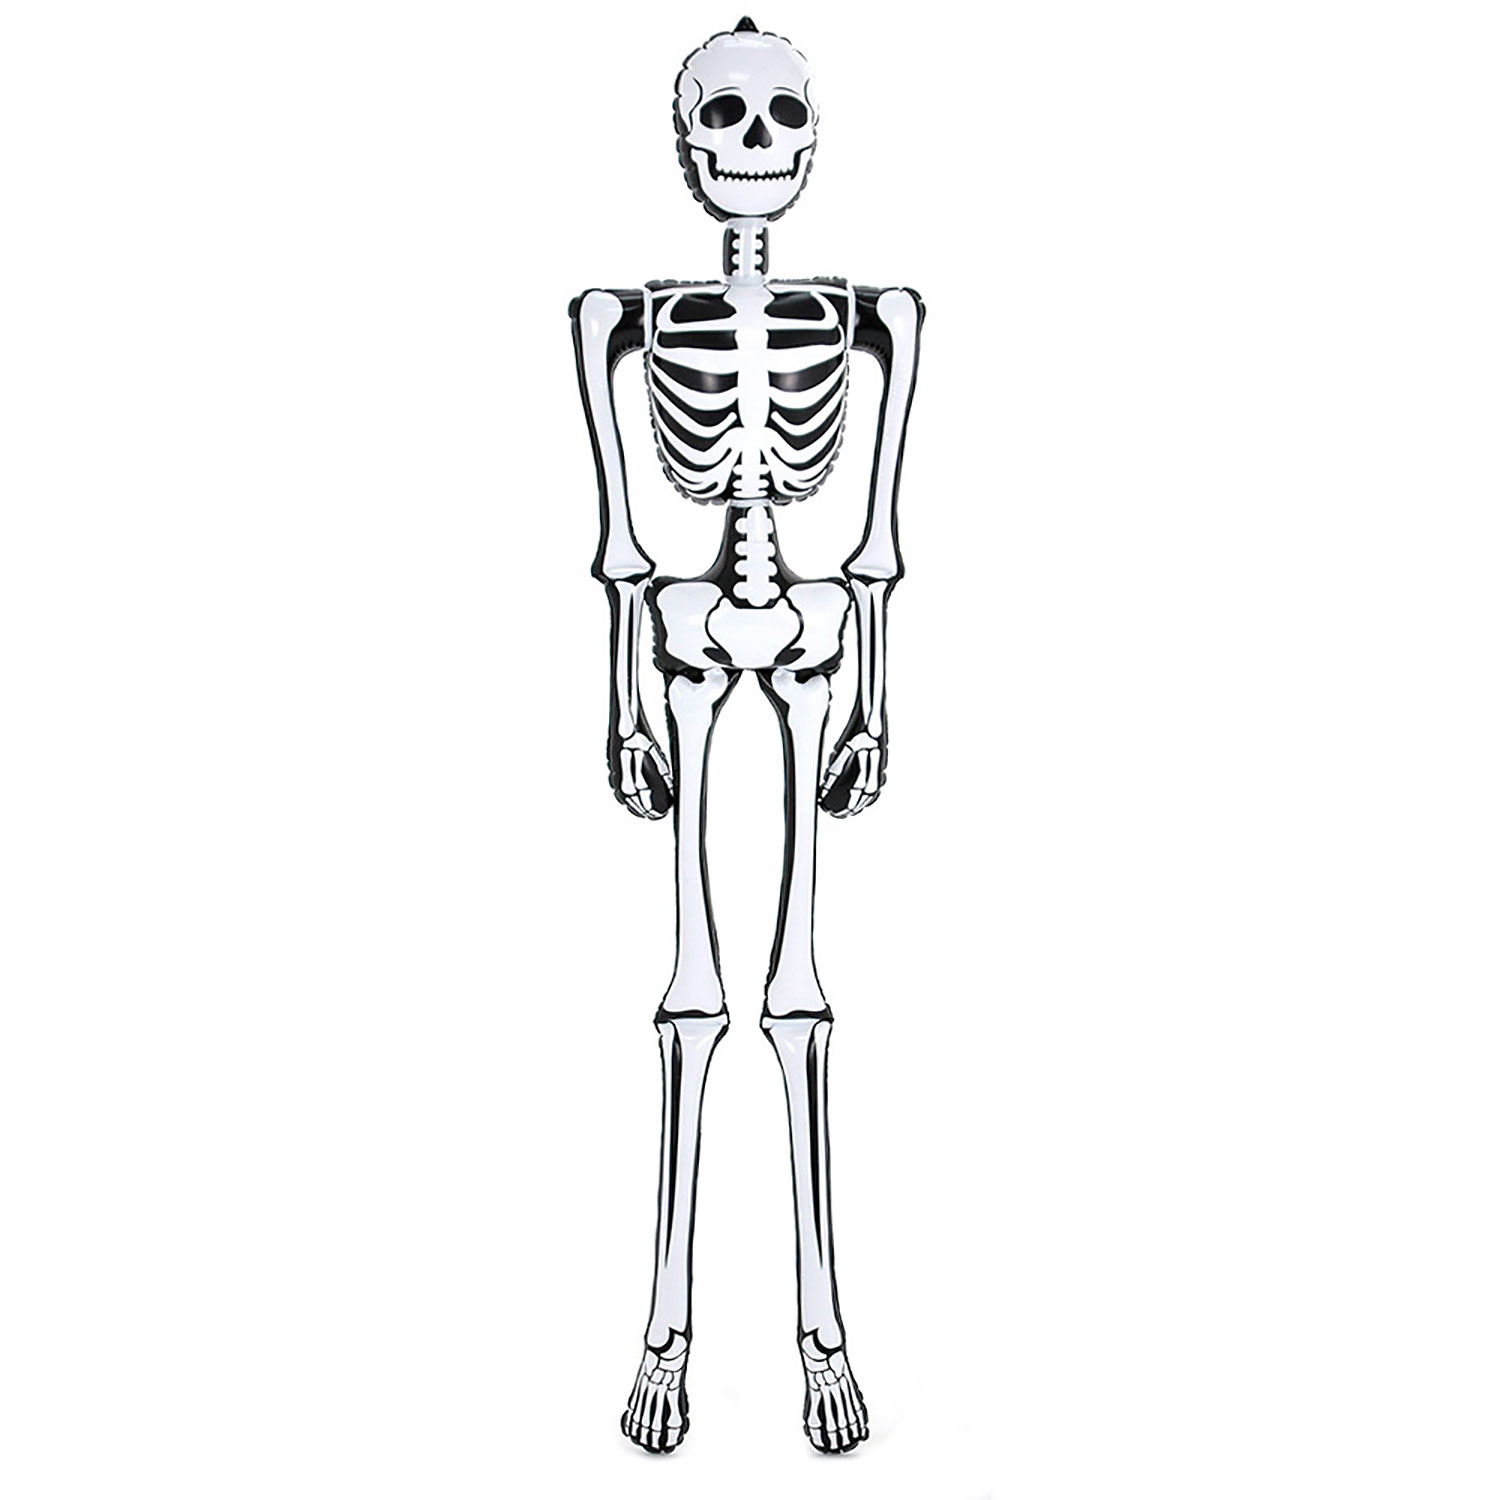 Inflatable Skeleton - 6 Foot: Rebecca's Toys & Prizes